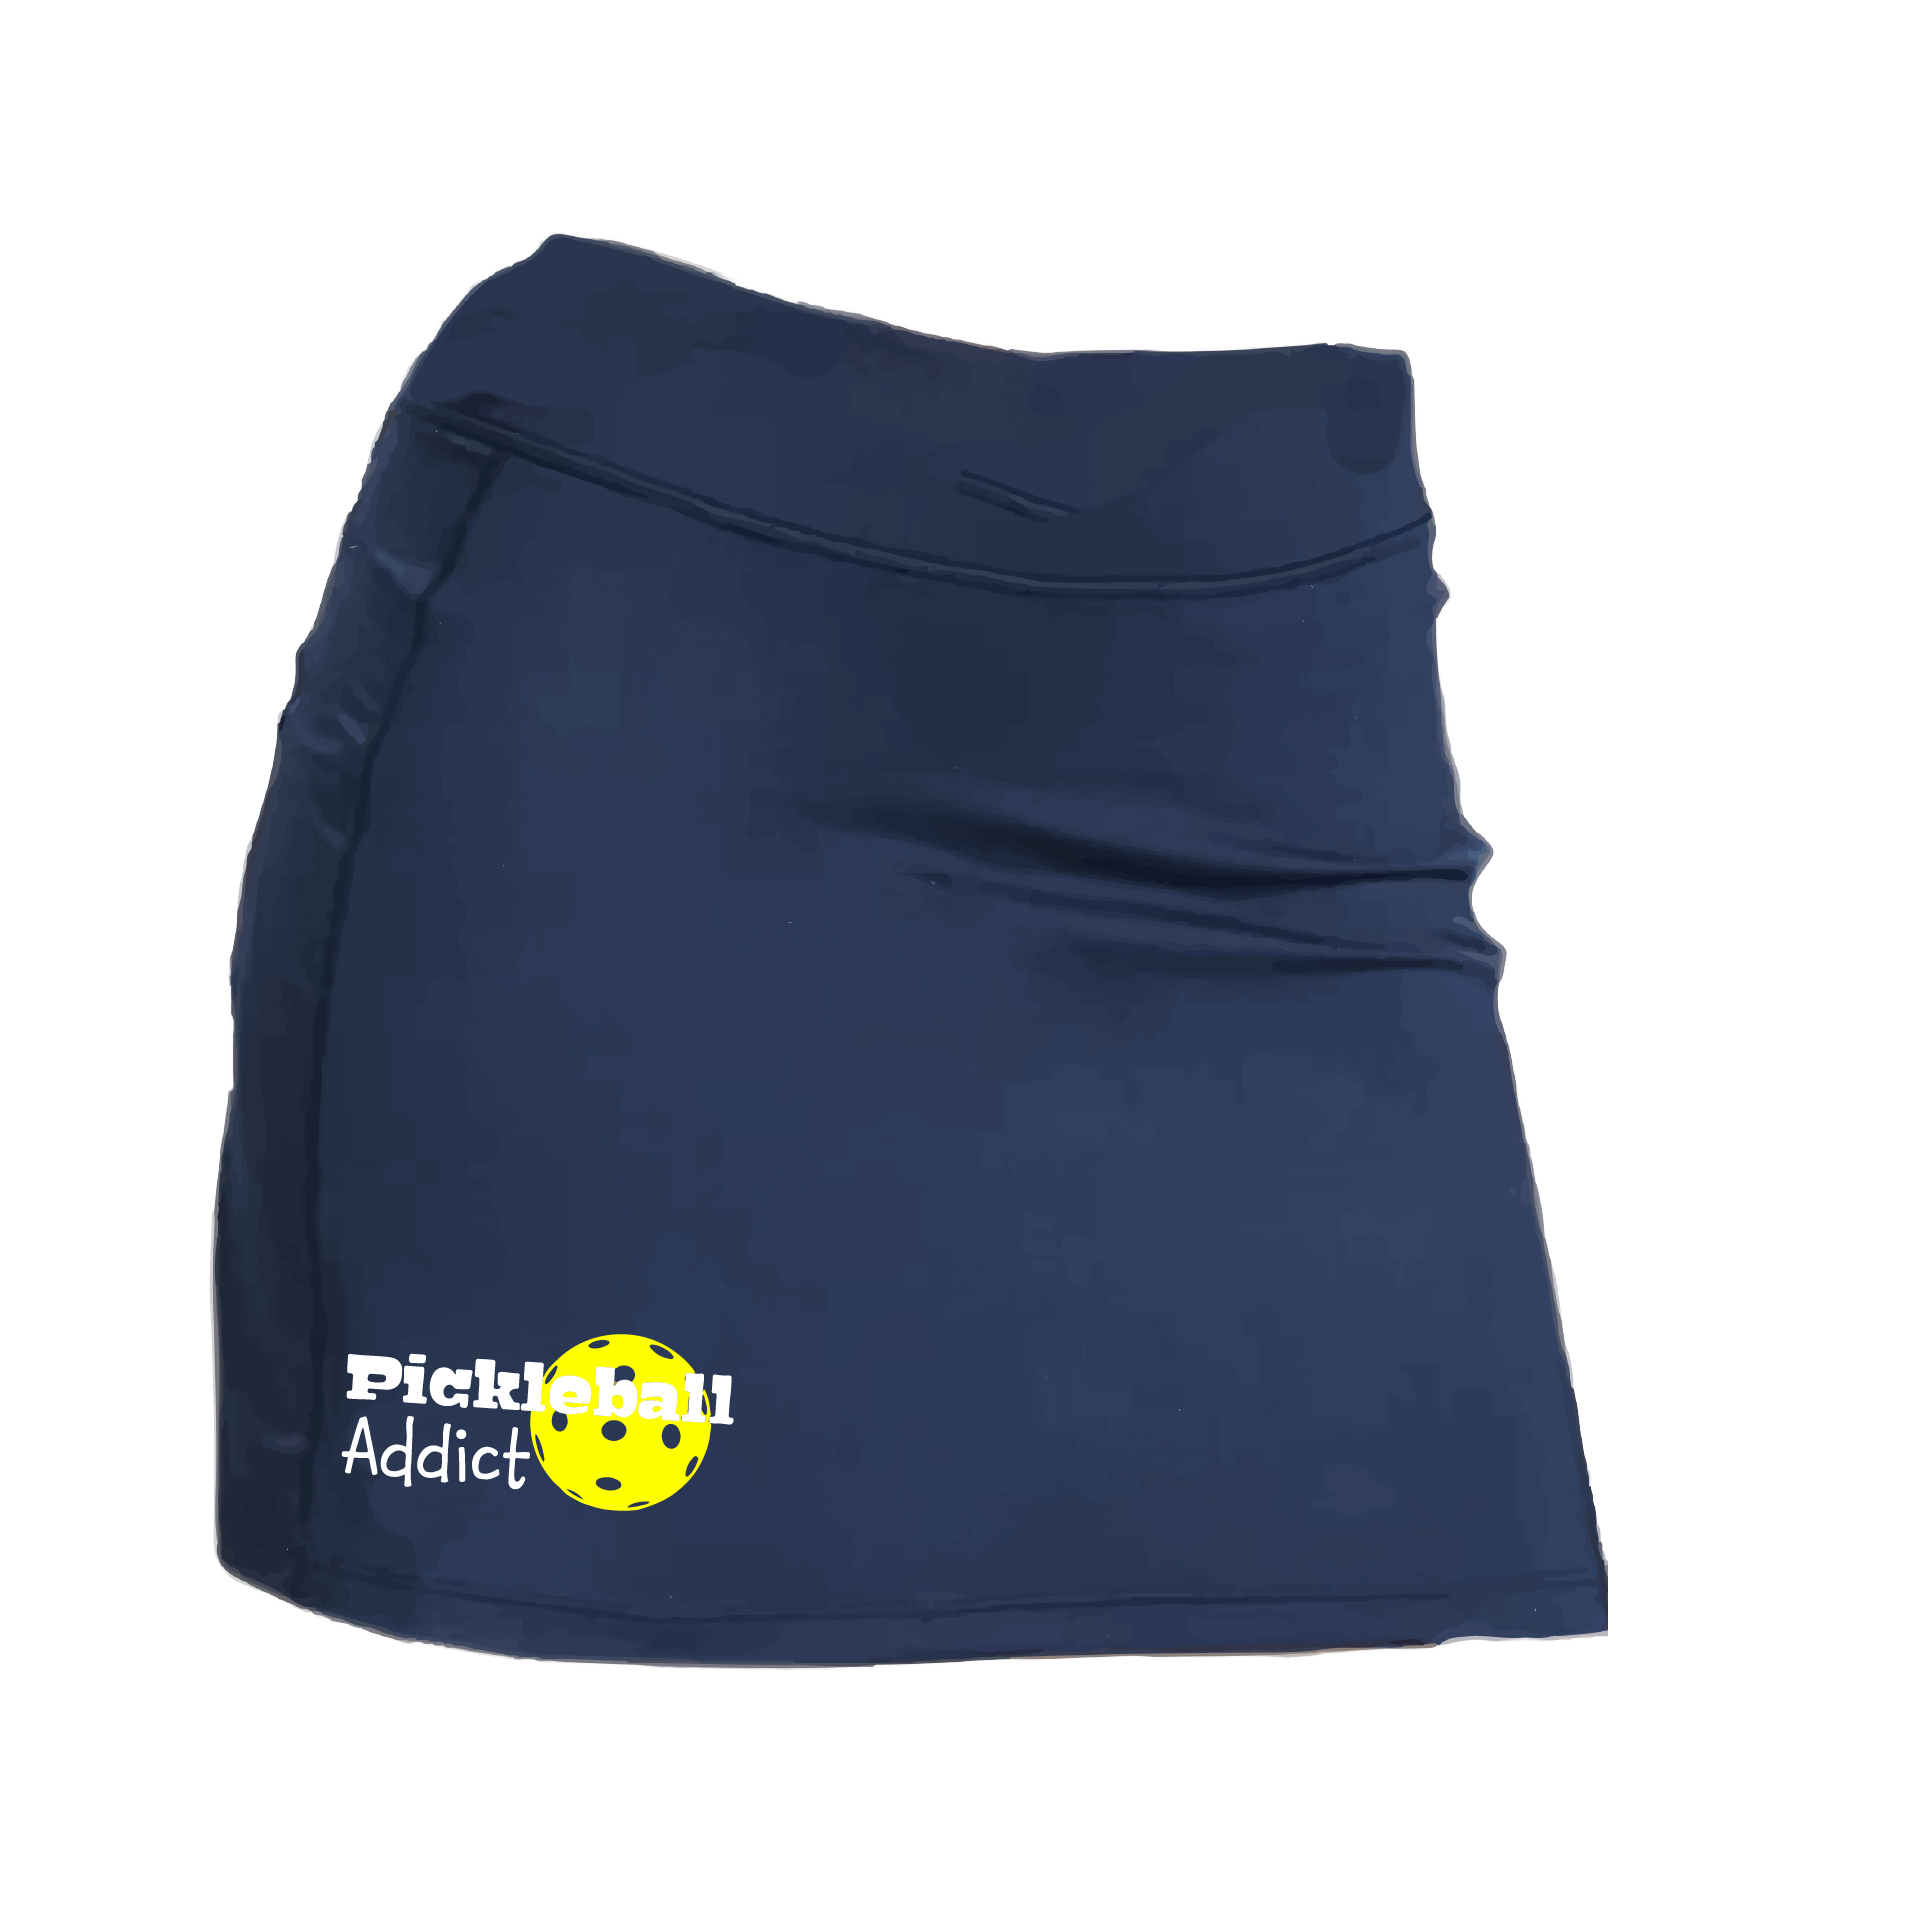 Pickleball Skort Design: Pickleball Addict  Women’s core active jersey-knit skort comes with built-in shorts made out of a poly-spandex blend that will keep your legs from rubbing together, without which often results in painful chafing. You can also feel secure knowing that no matter how strenuous the exercise, the skort will remain in place (it won’t ride up!).